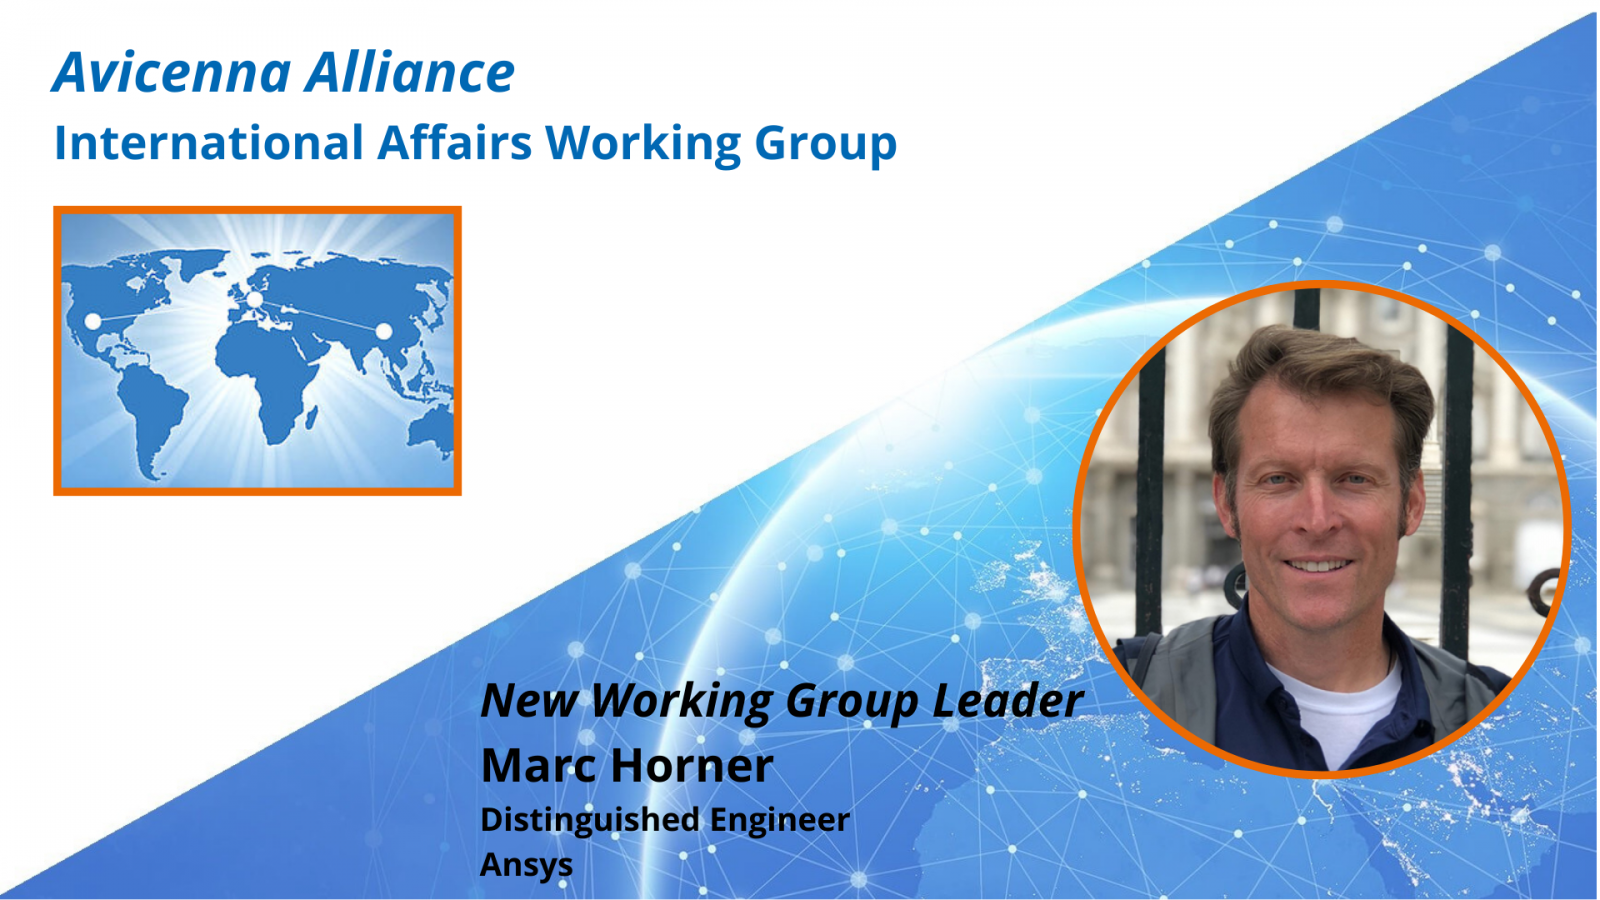 Marc Horner is the new Avicenna International Affairs Working Group Leader